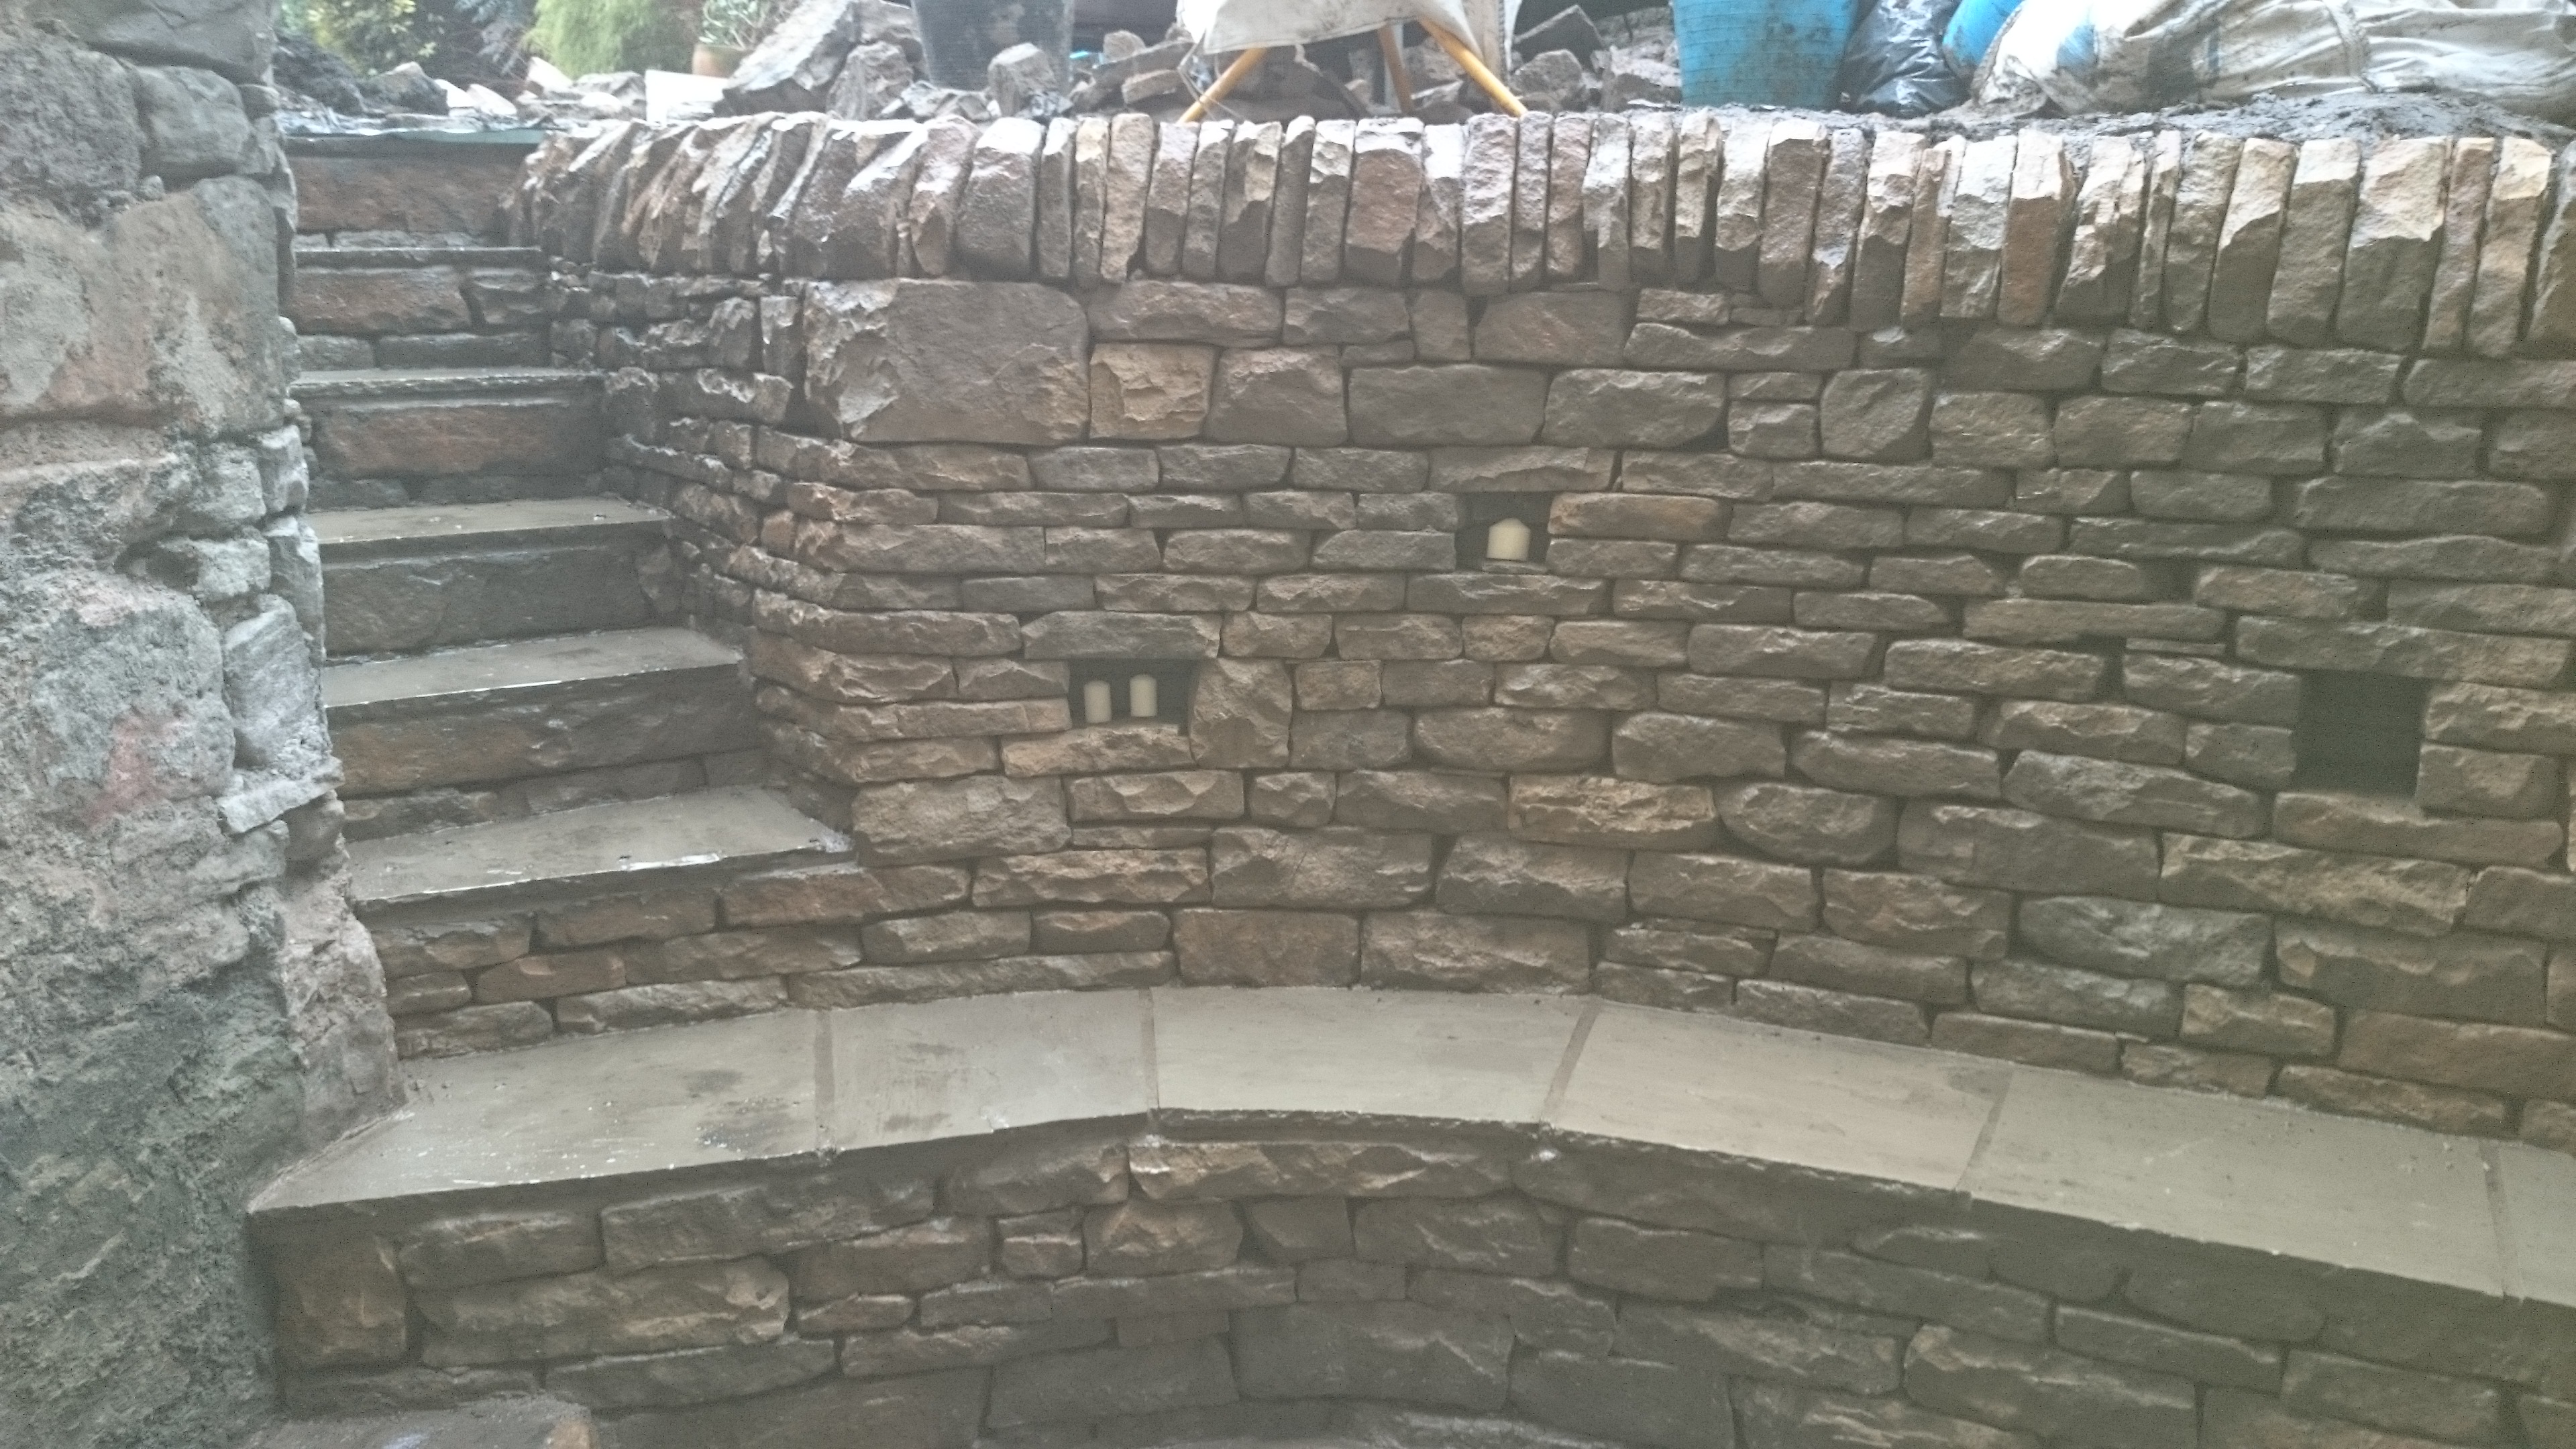 Dry stone retaining wall and bench.